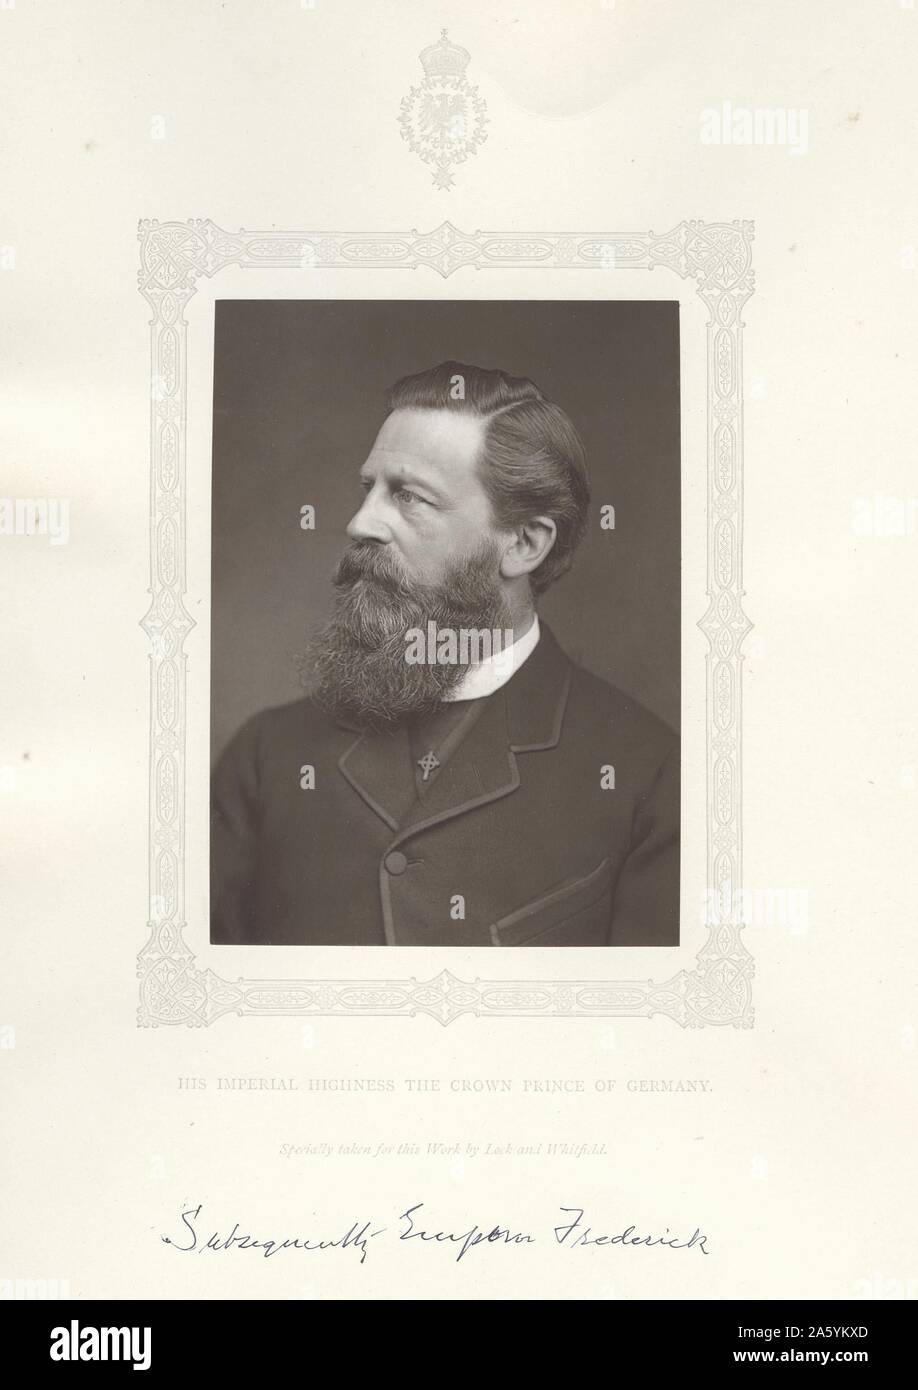 Frederick III (1831-1888) Emperor of Germany 1888. Frederick c1880 when still Crown Prince of Germany.  He married  Victoria, Princess Royal of Britain and eldest child of Queen Victoria. Woodburytype. Stock Photo